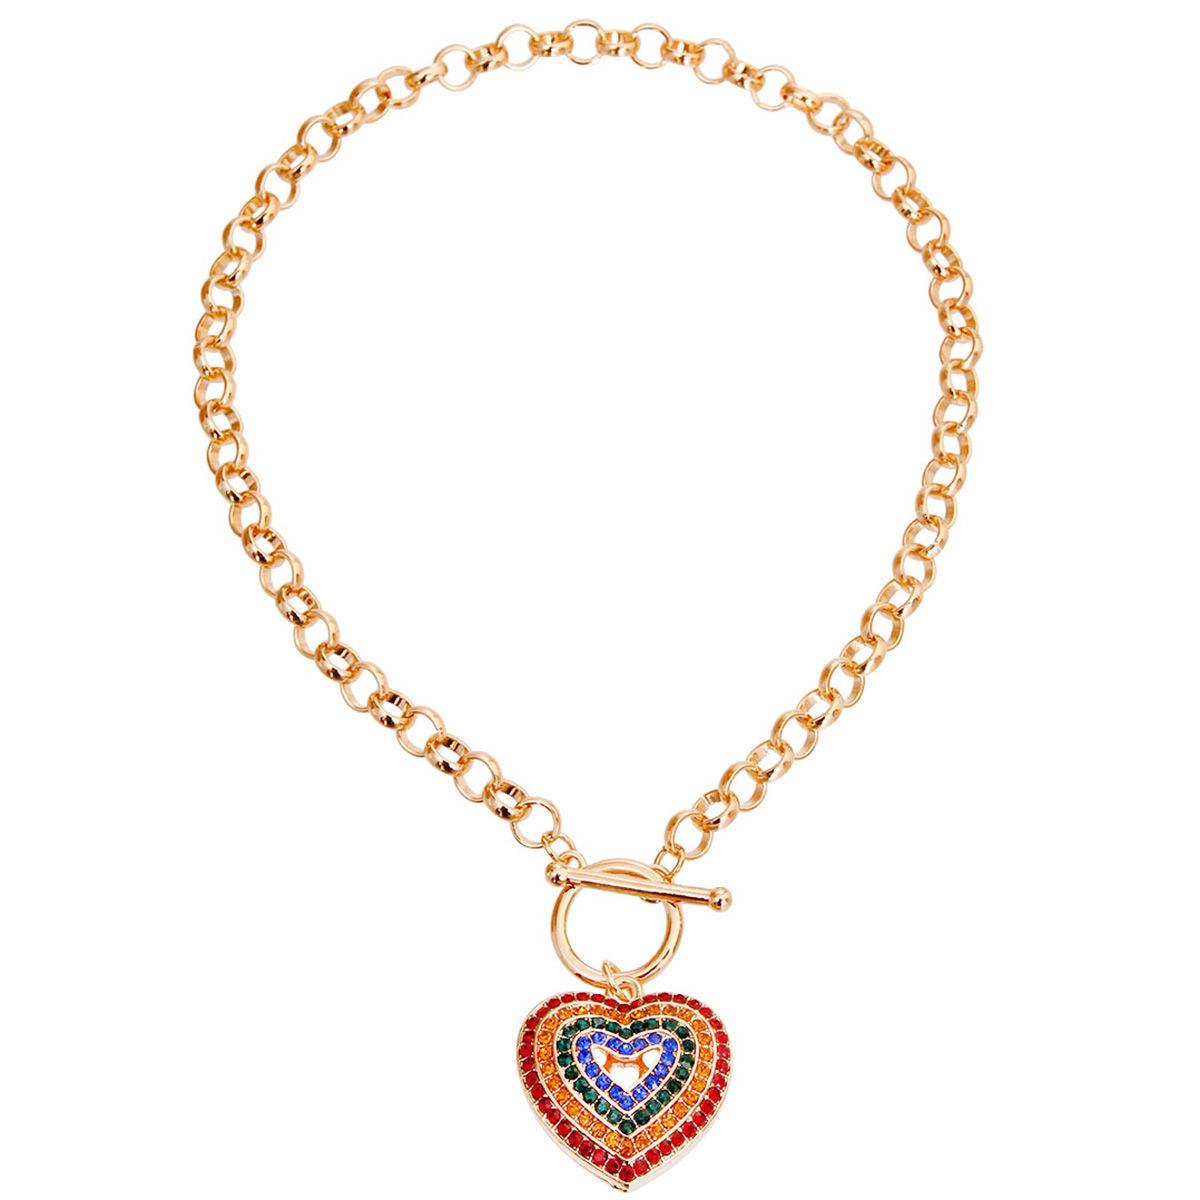 Make a Style Statement: Women's Multicolor Heart Necklace - Embrace Love!